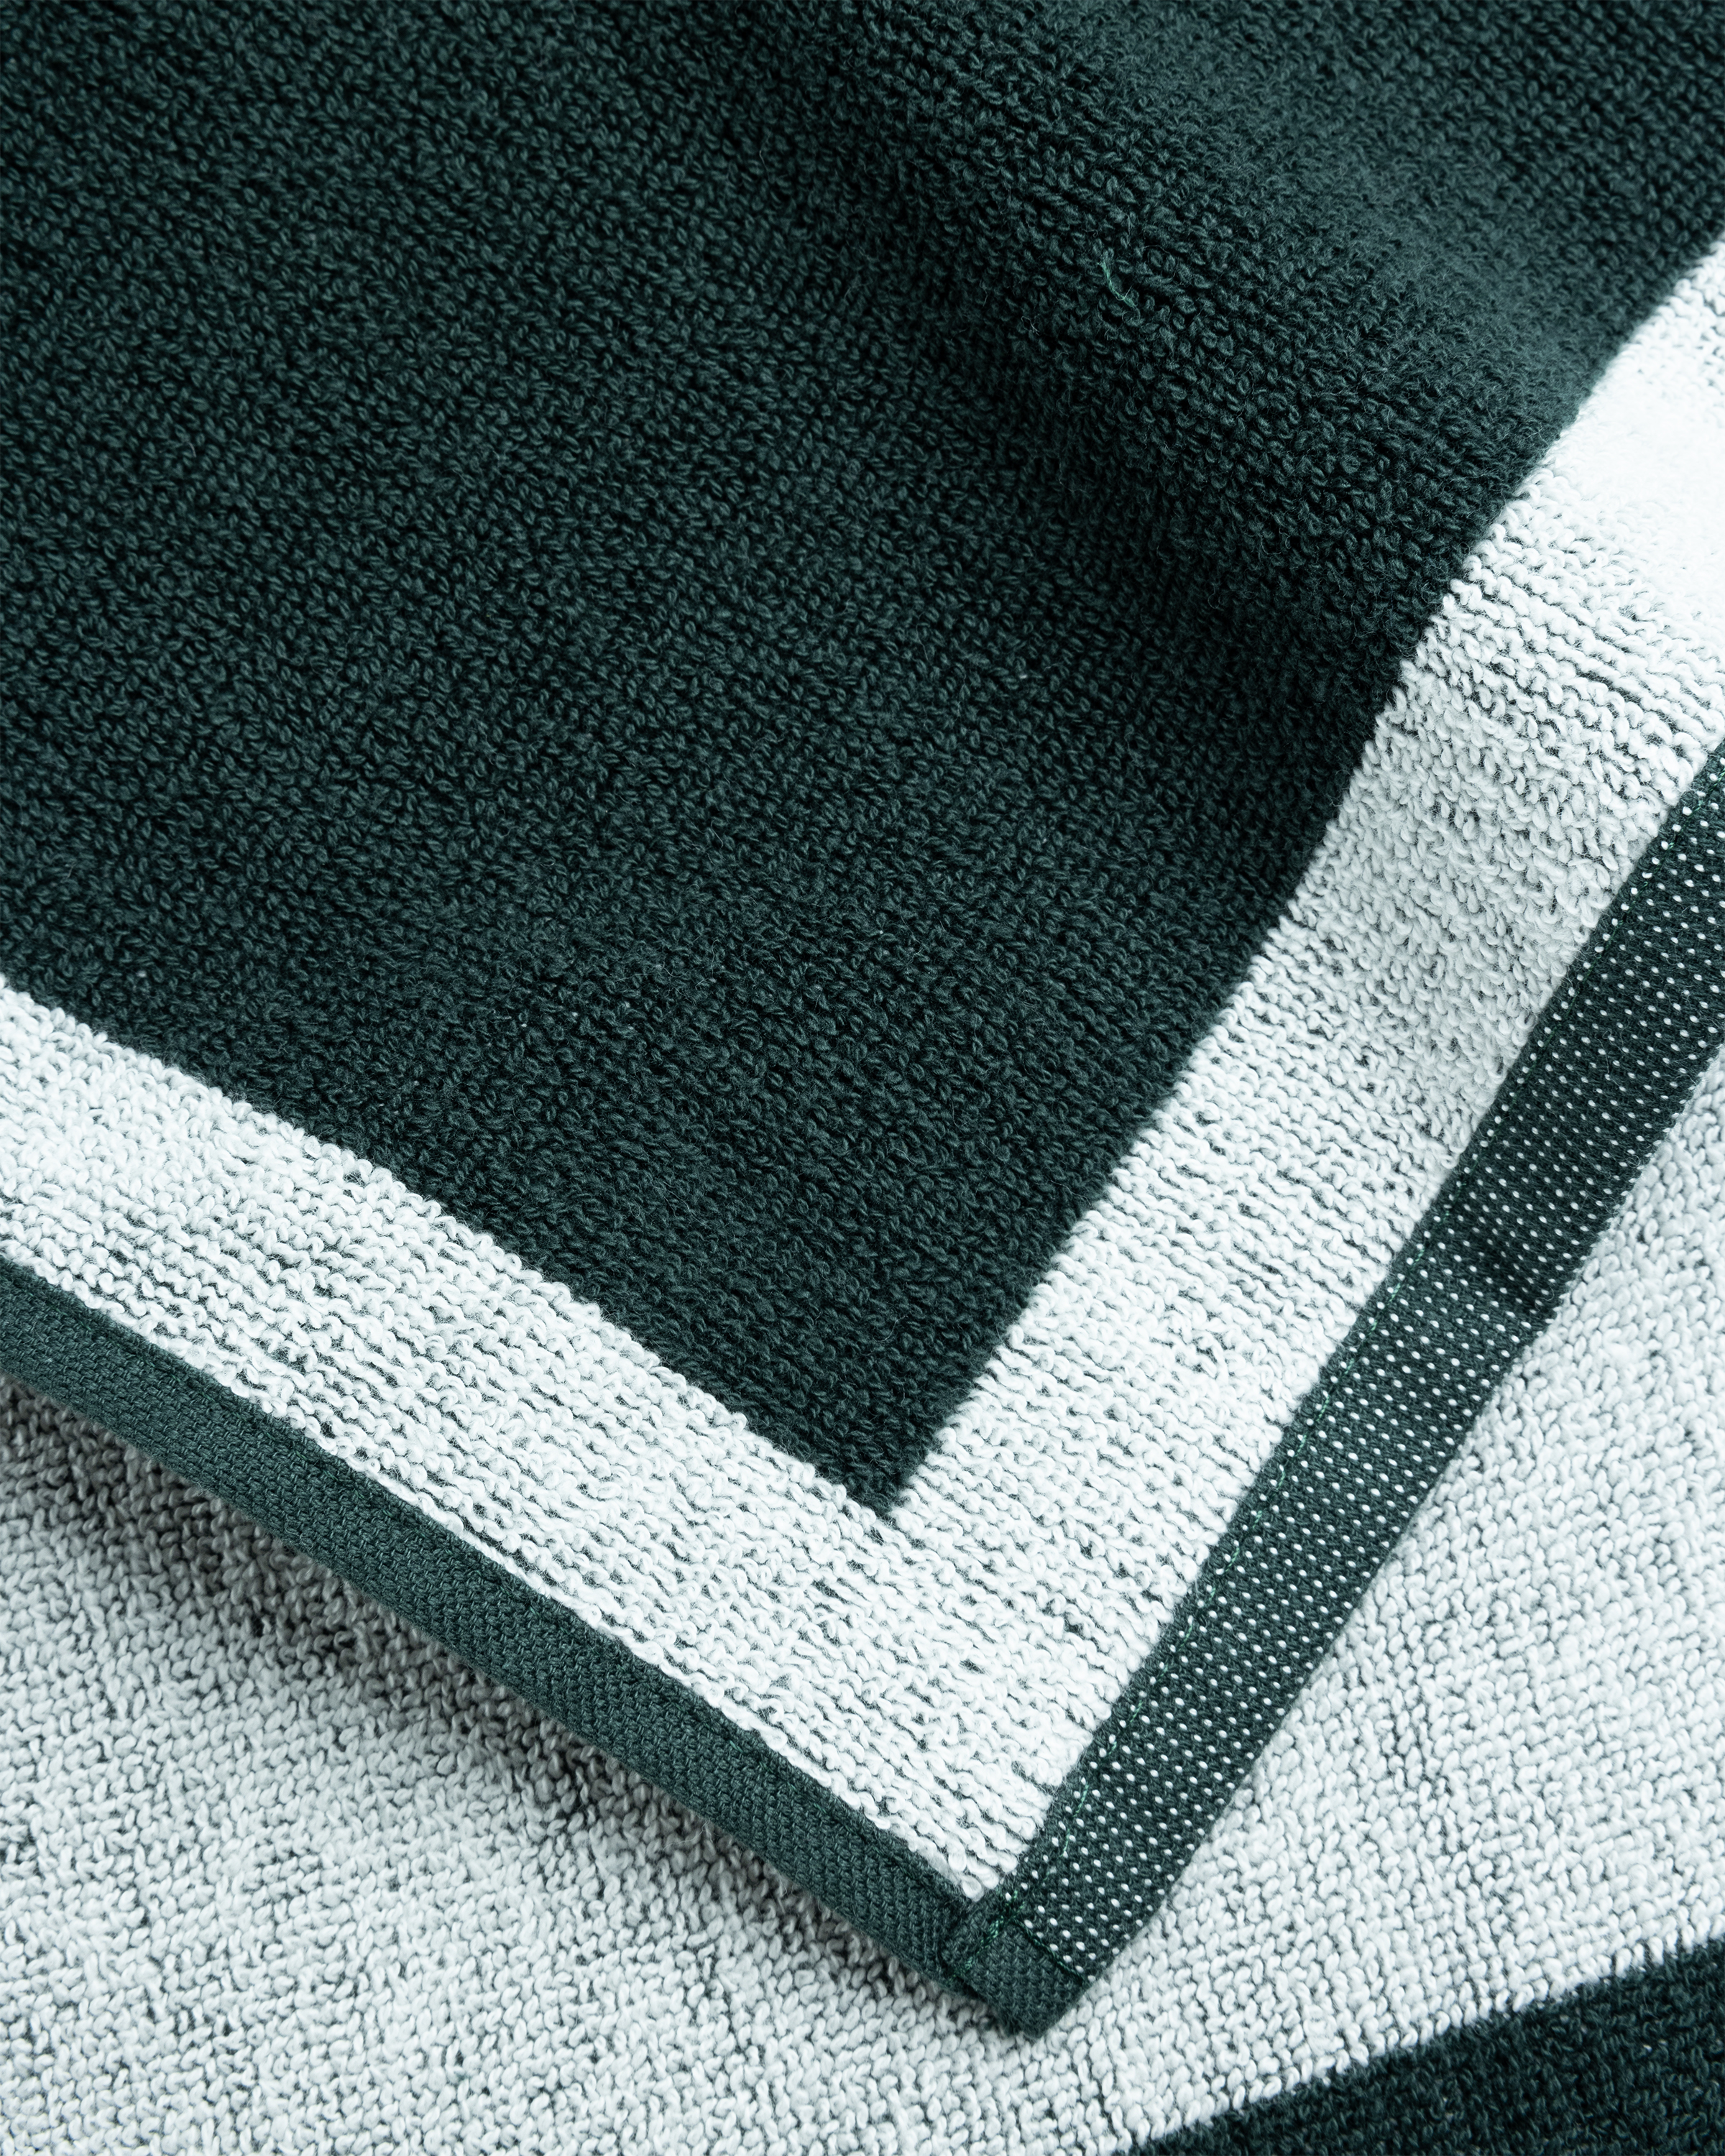 Lacoste x Highsnobiety – Not In Paris Towel Green - Towels - Green - Image 4